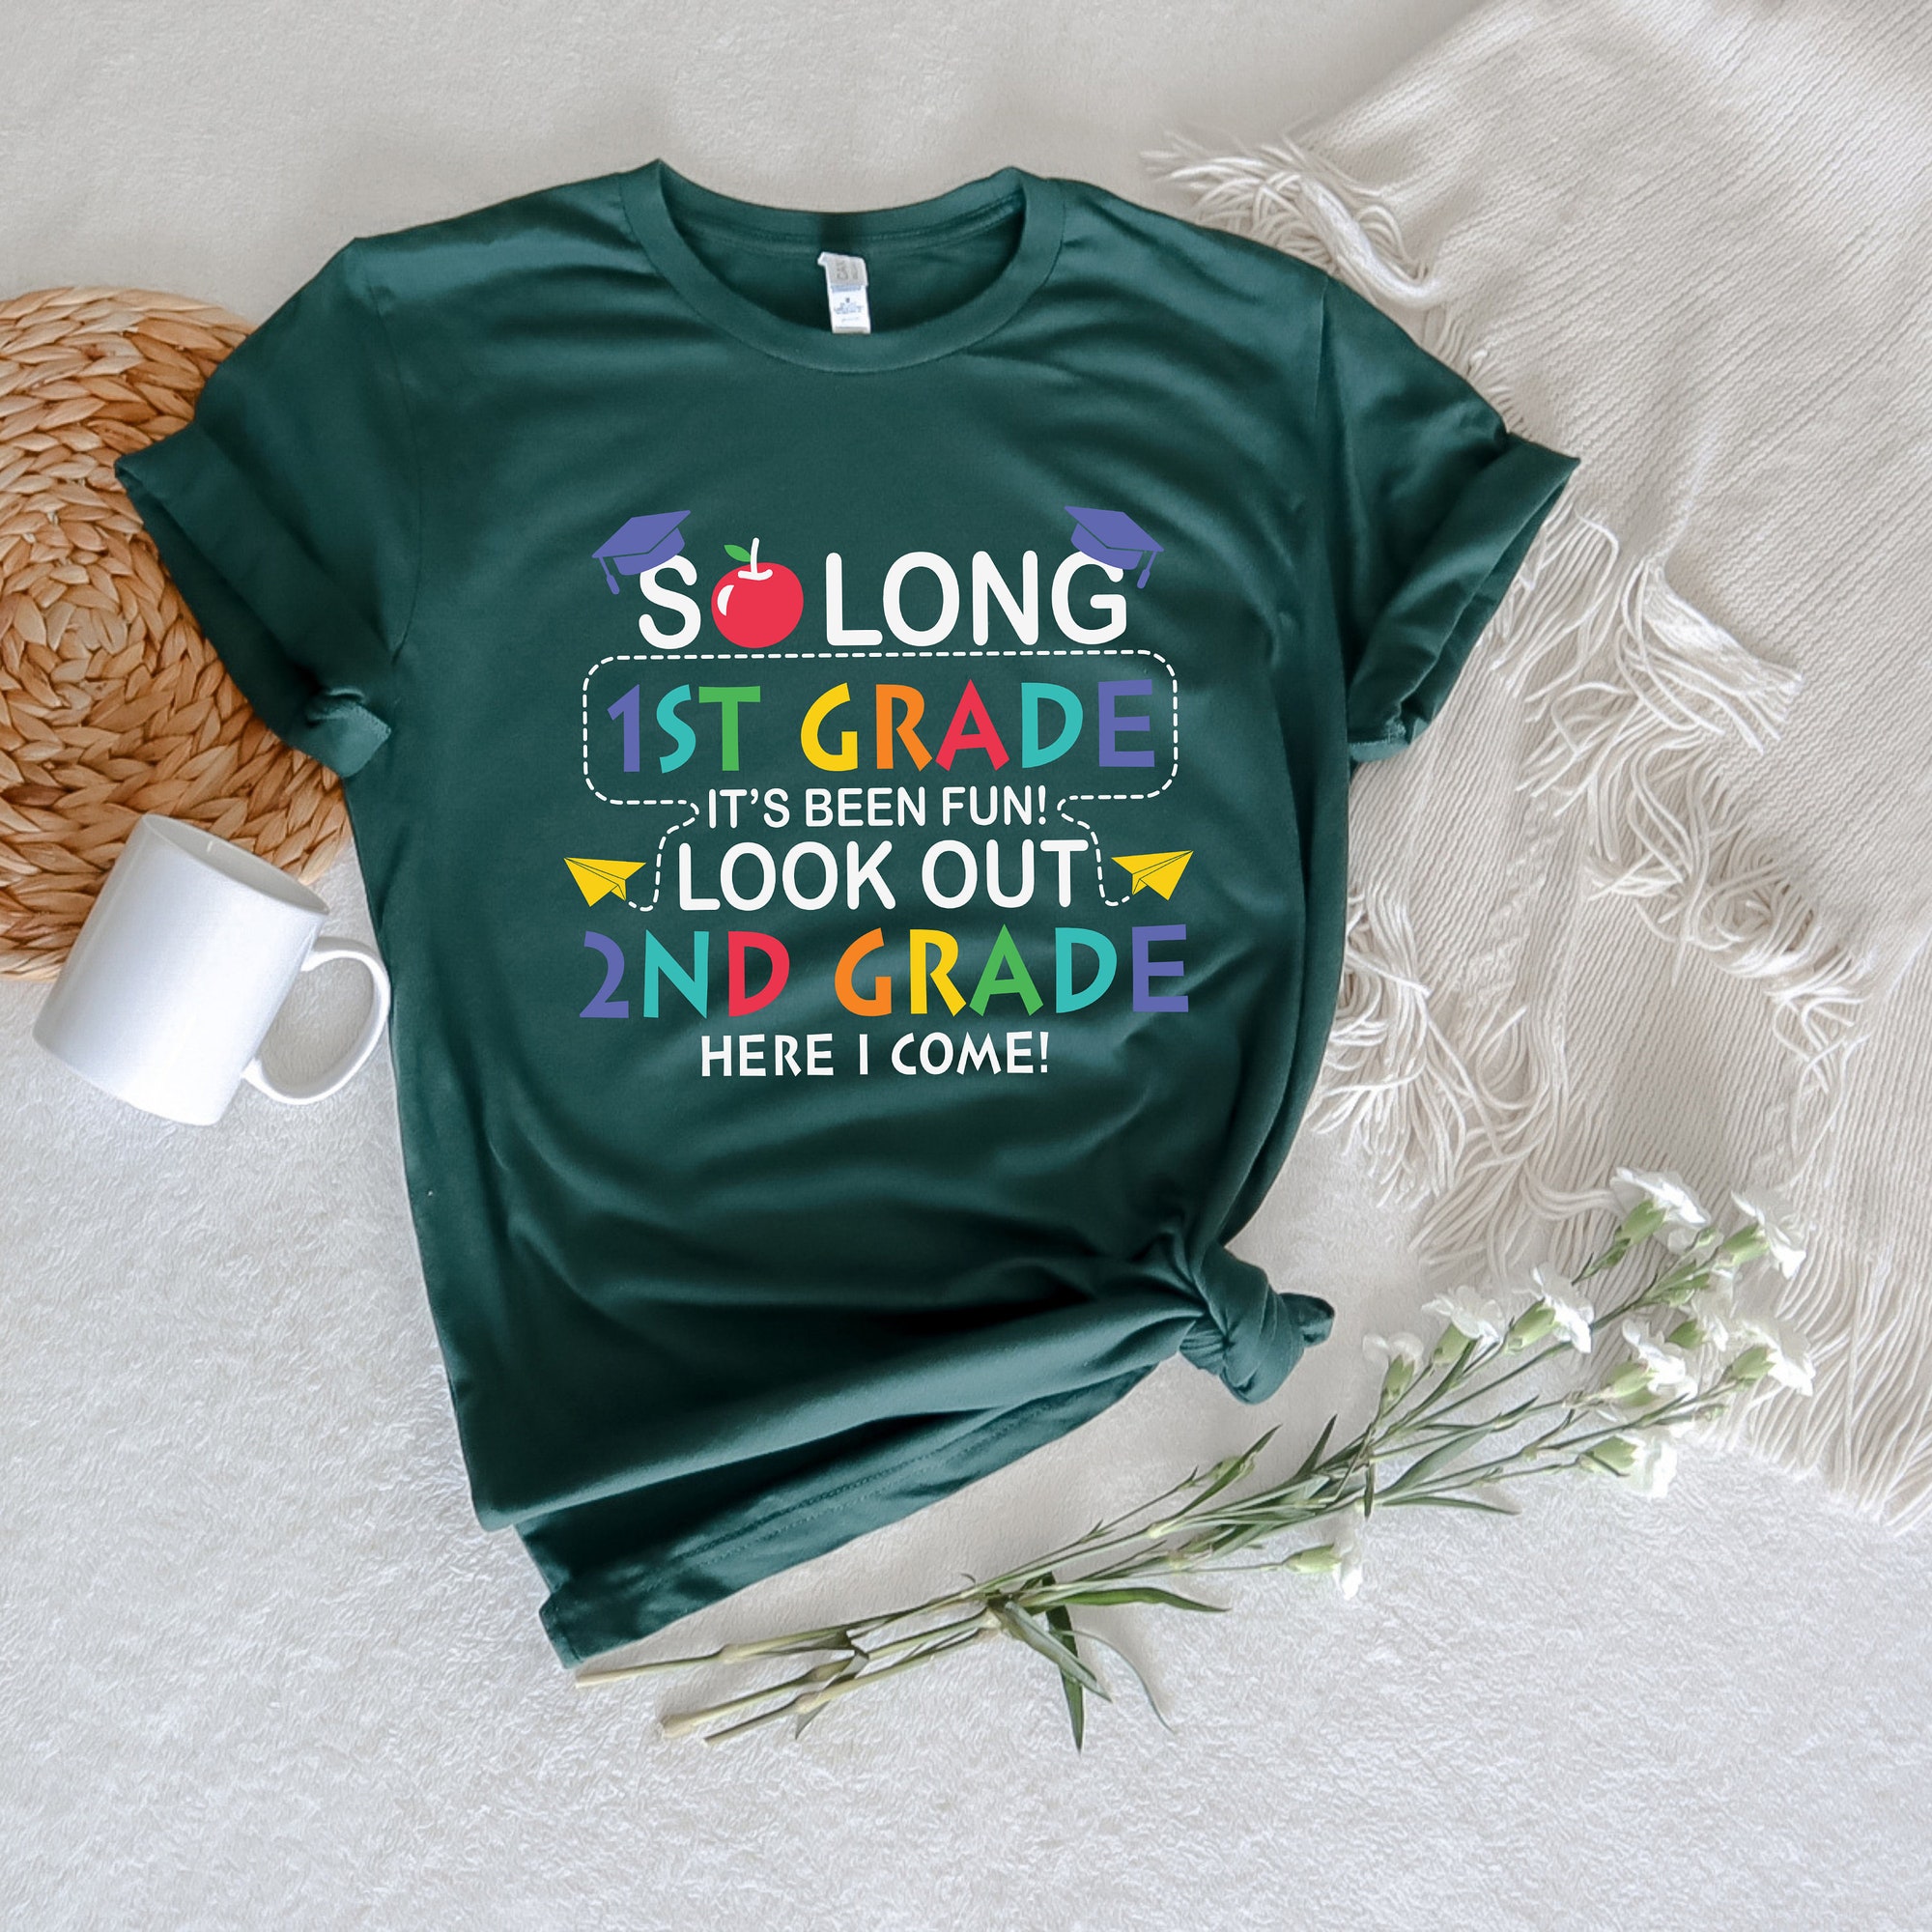 So Long 1st Grade It's Been Fun!Look Out 2nd Grade Here I Come Shirt